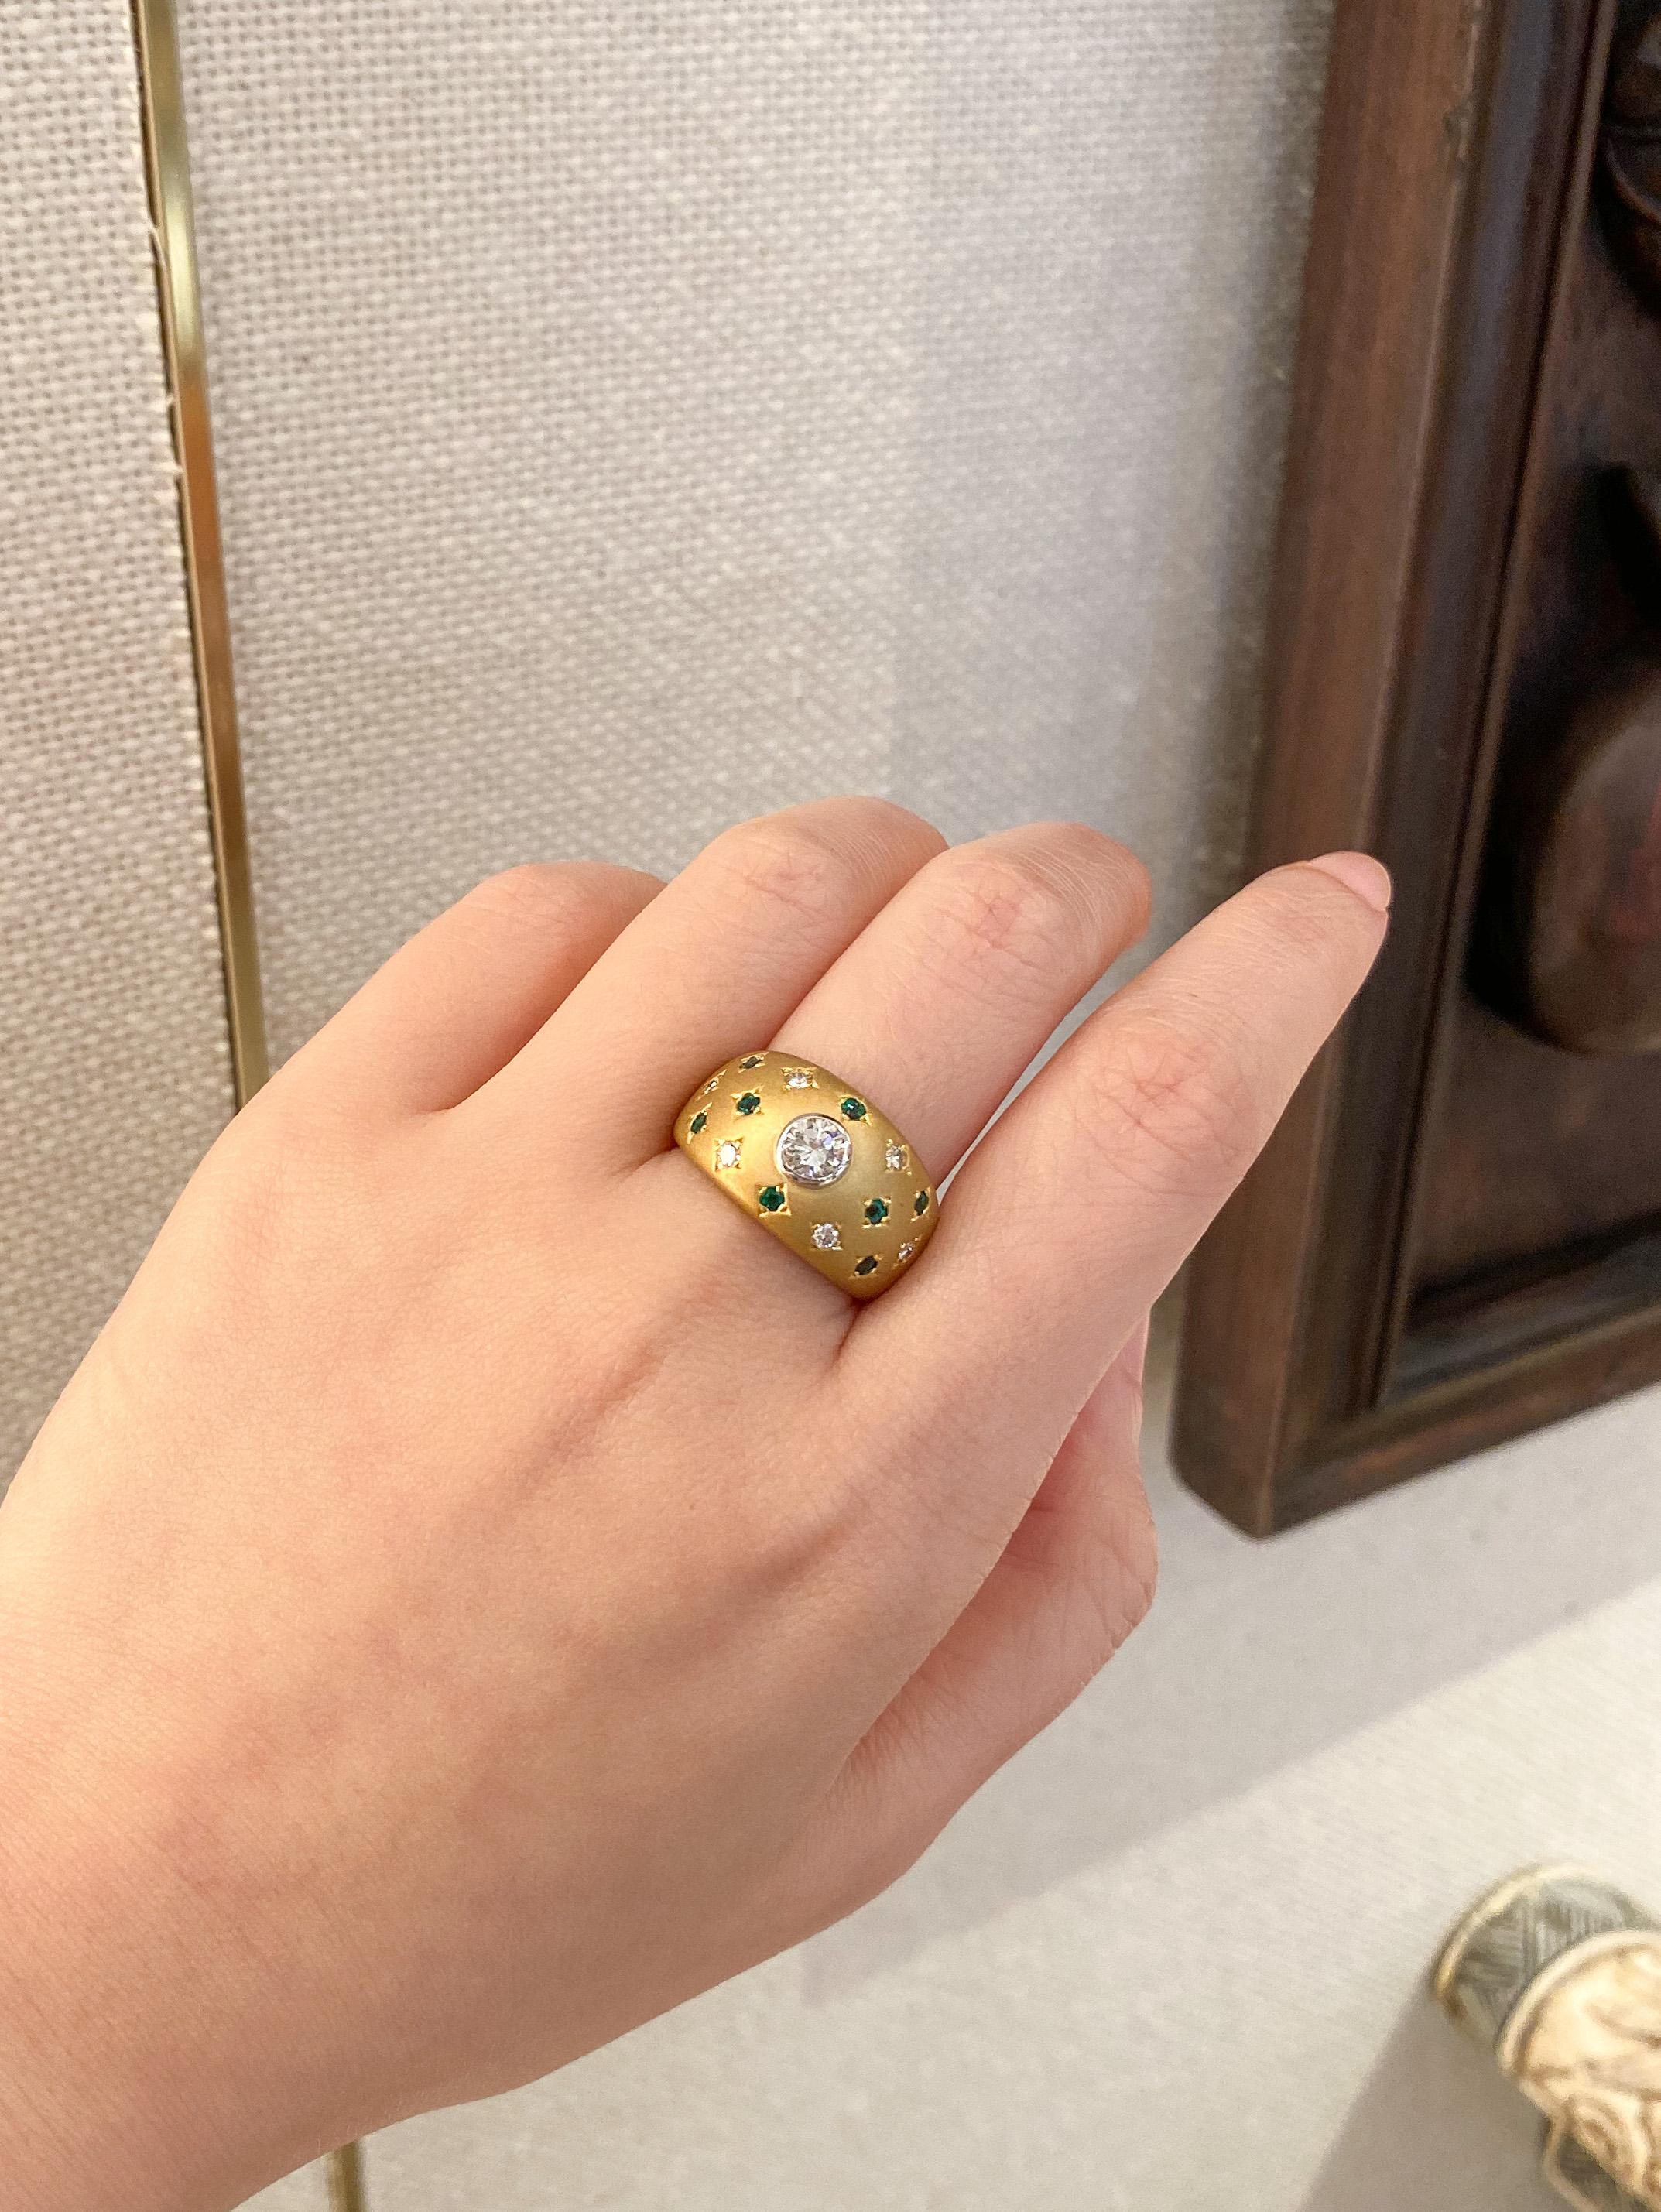 The design behind this artisanal dome band ring was inspired by the beautiful starry nights that Dilys’ creative director and designer, Ms. Dilys Young, experienced on her travels to Nepal many years ago. This 18 karat gold ring with matte finishing